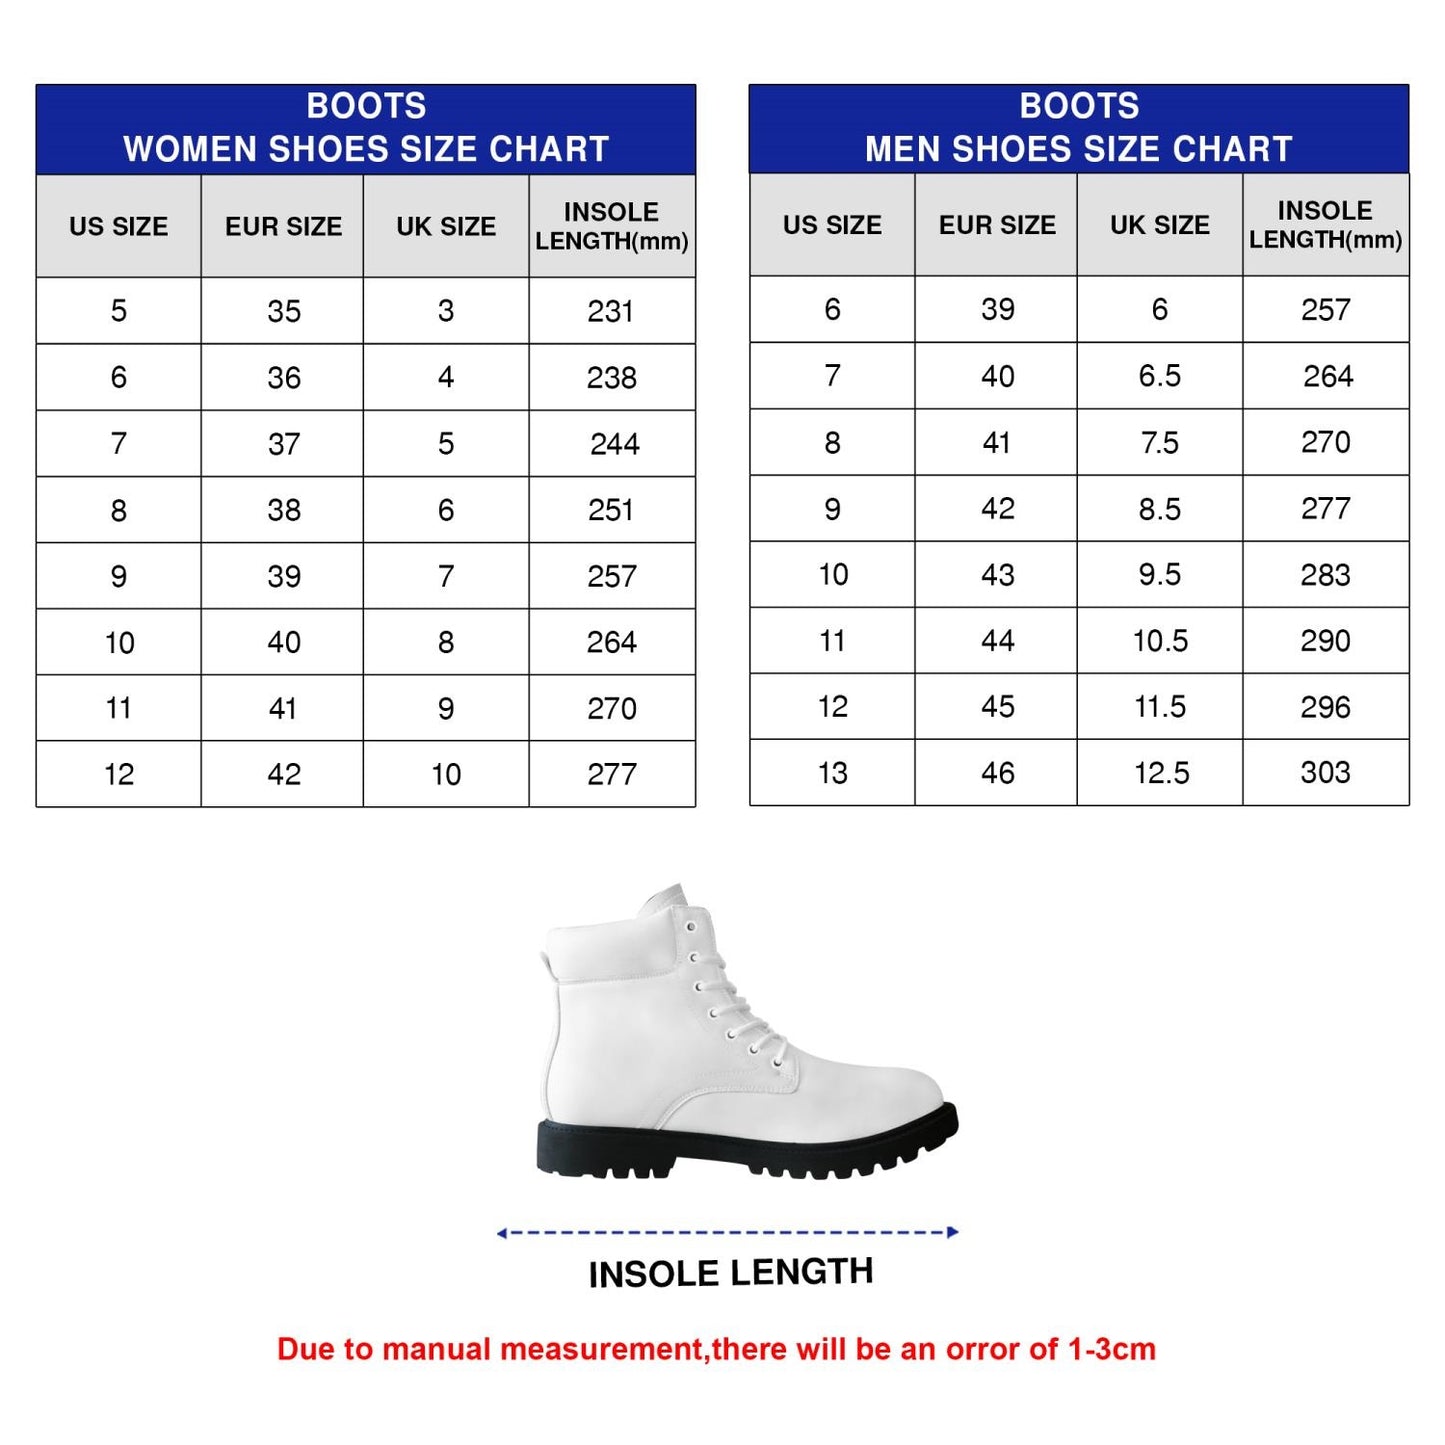 Black Jesus Tbl Boots 1 - Christian Shoes For Men And Women